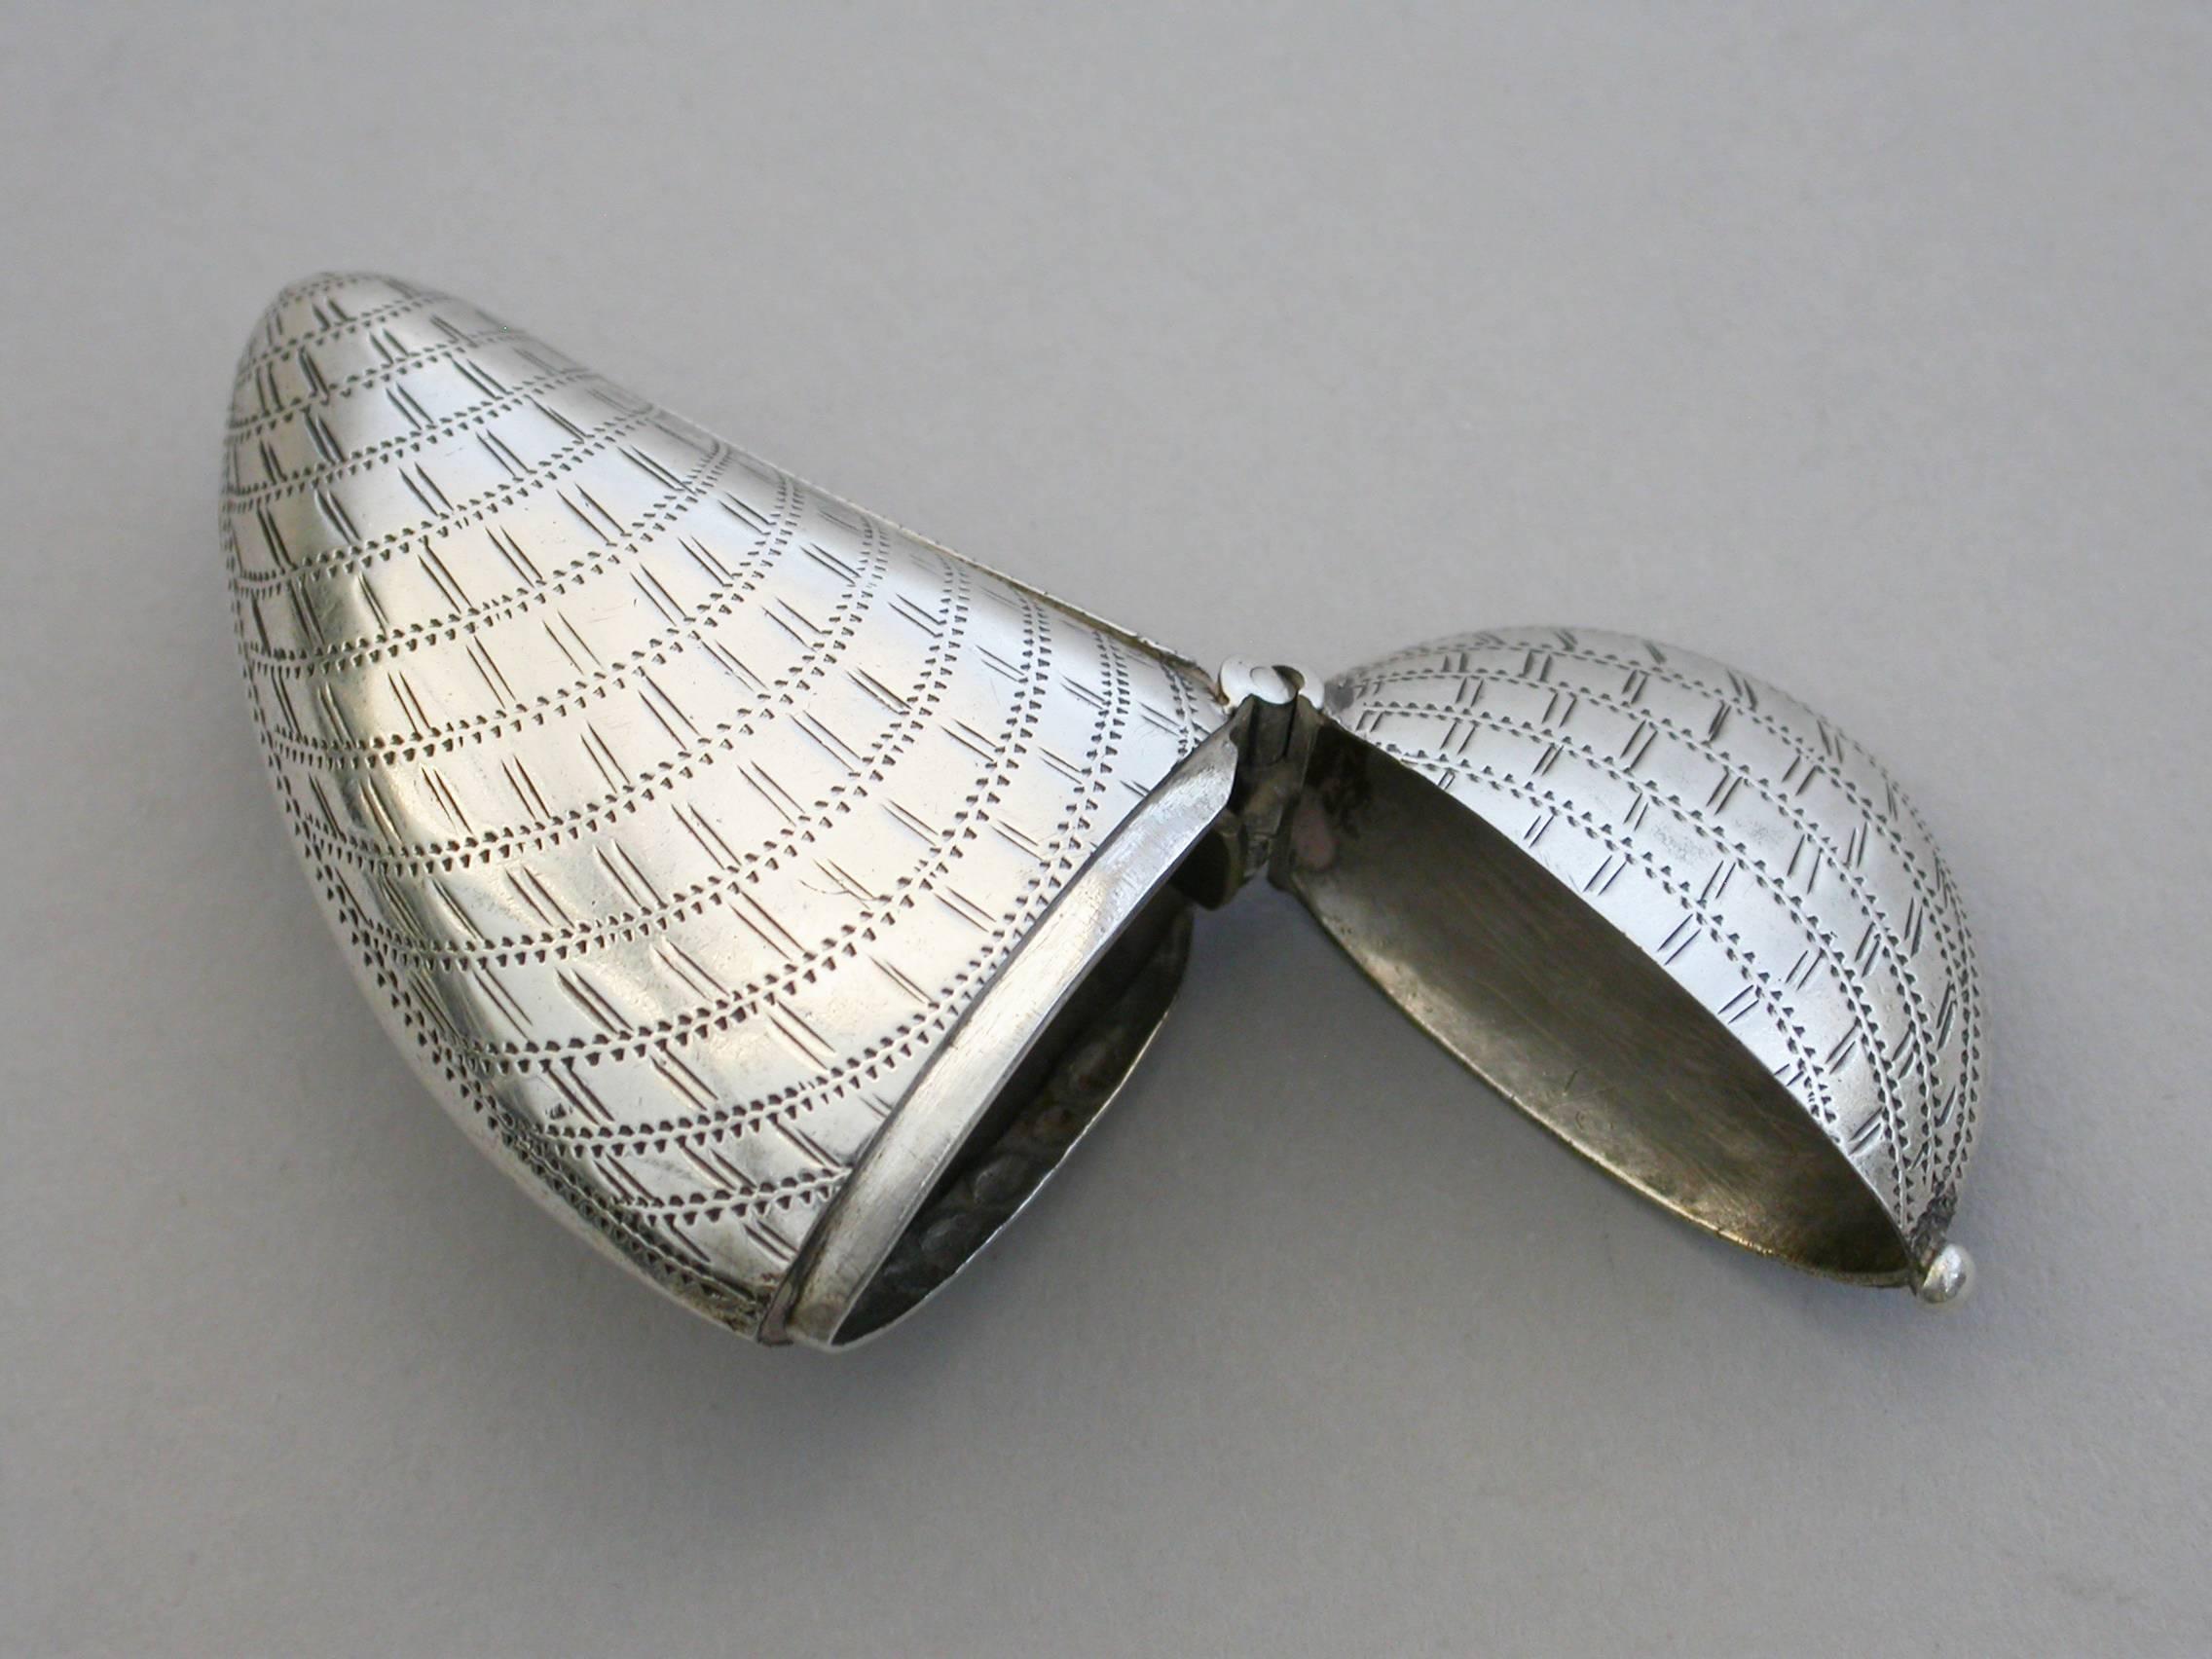 A rare Victorian novelty silver vesta case made in the form of a Mussel Shell, with hinged flip-top lid and prick-dot and scratch engraved decoration to simulate a real shell.

By Hillard & Thomason, Birmingham, 1881

In good condition with no